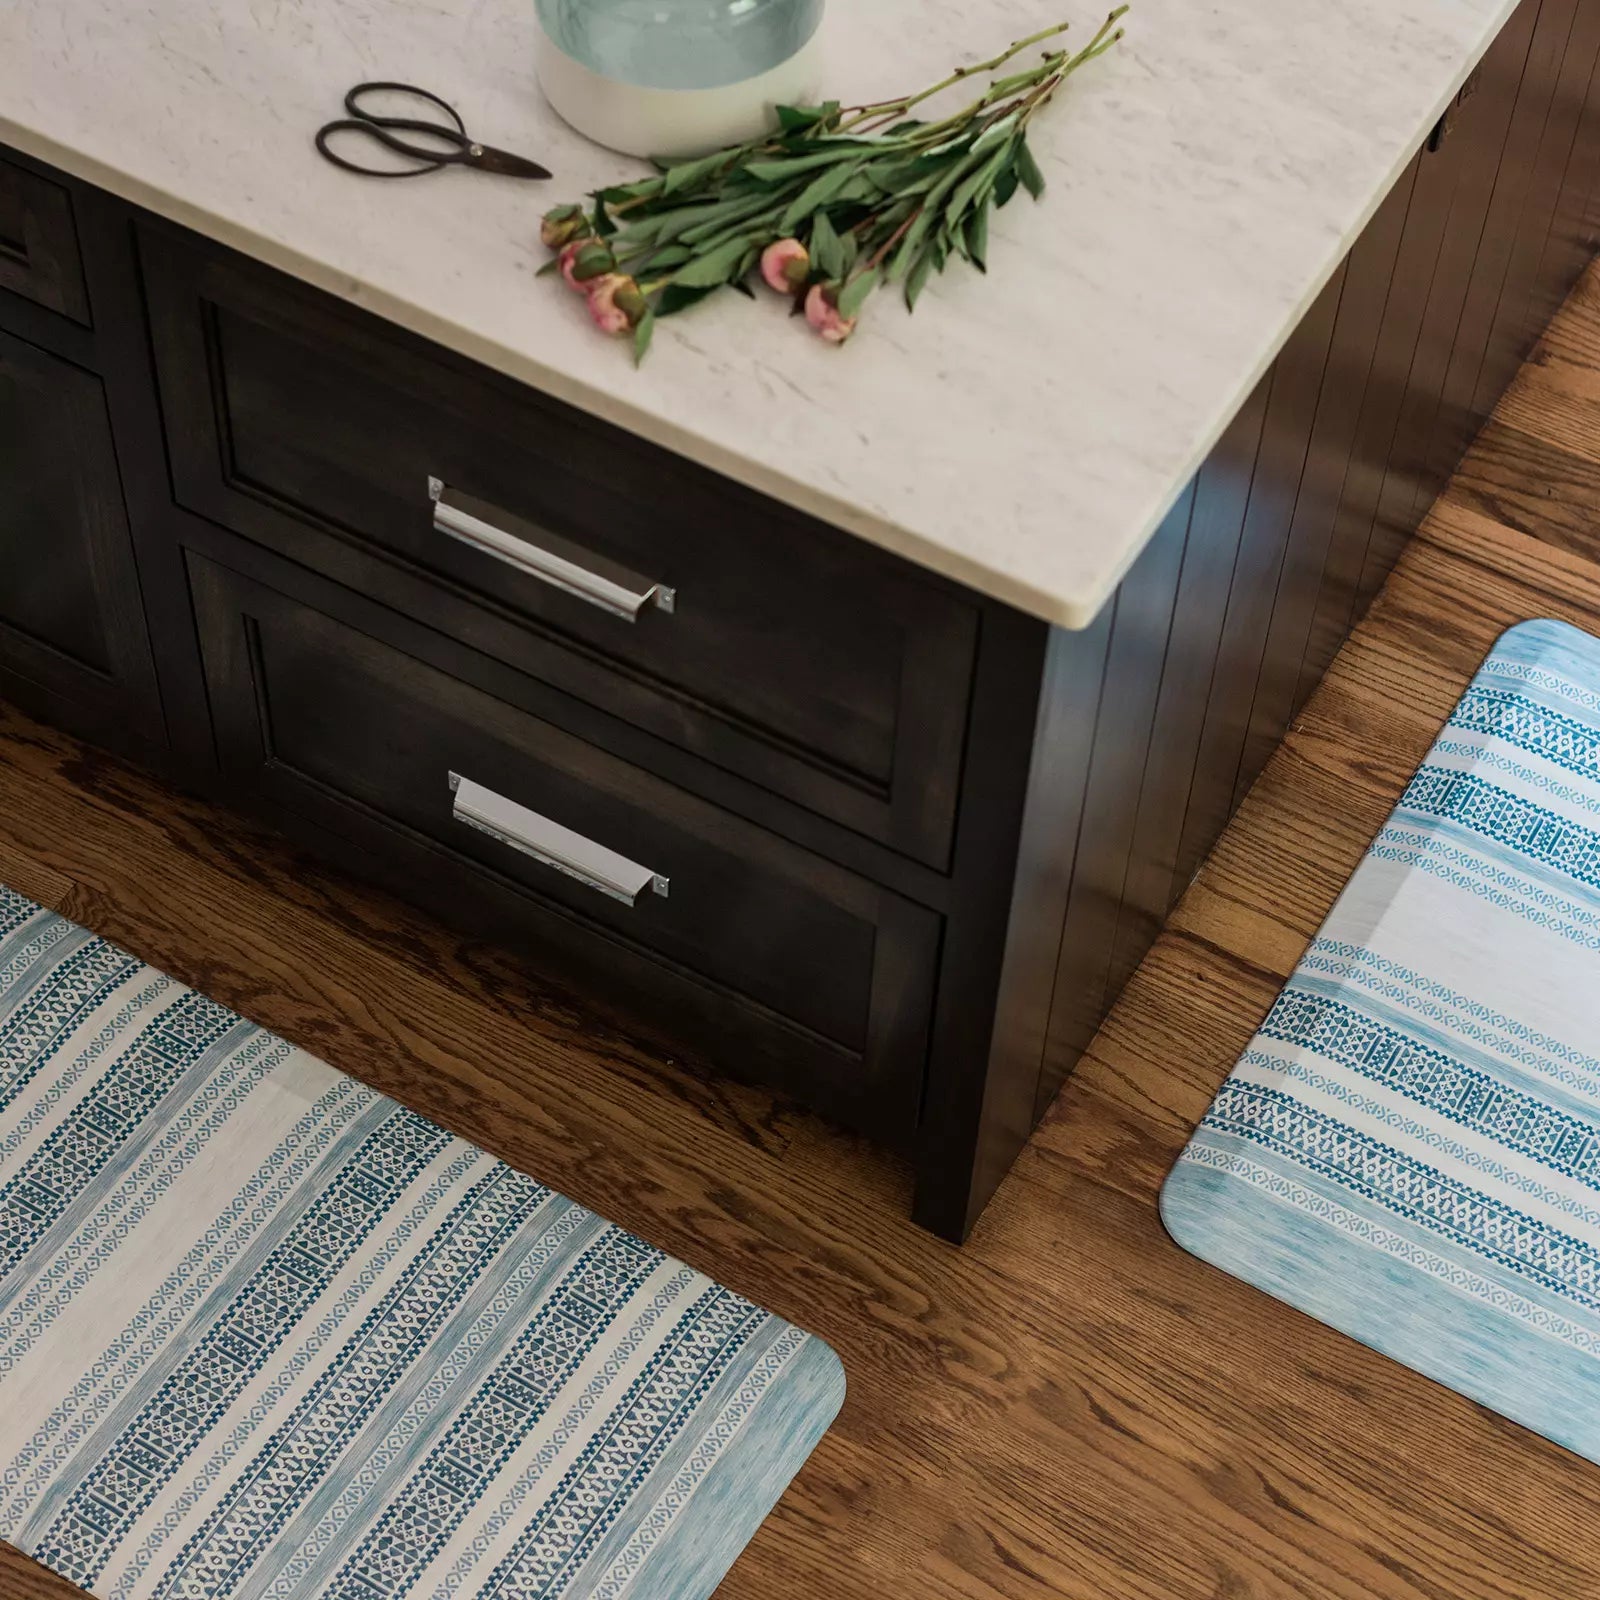 Paloma blue and white boho stripe kitchen mat shown from above in kitchen in sizes 20x72 and 20x32